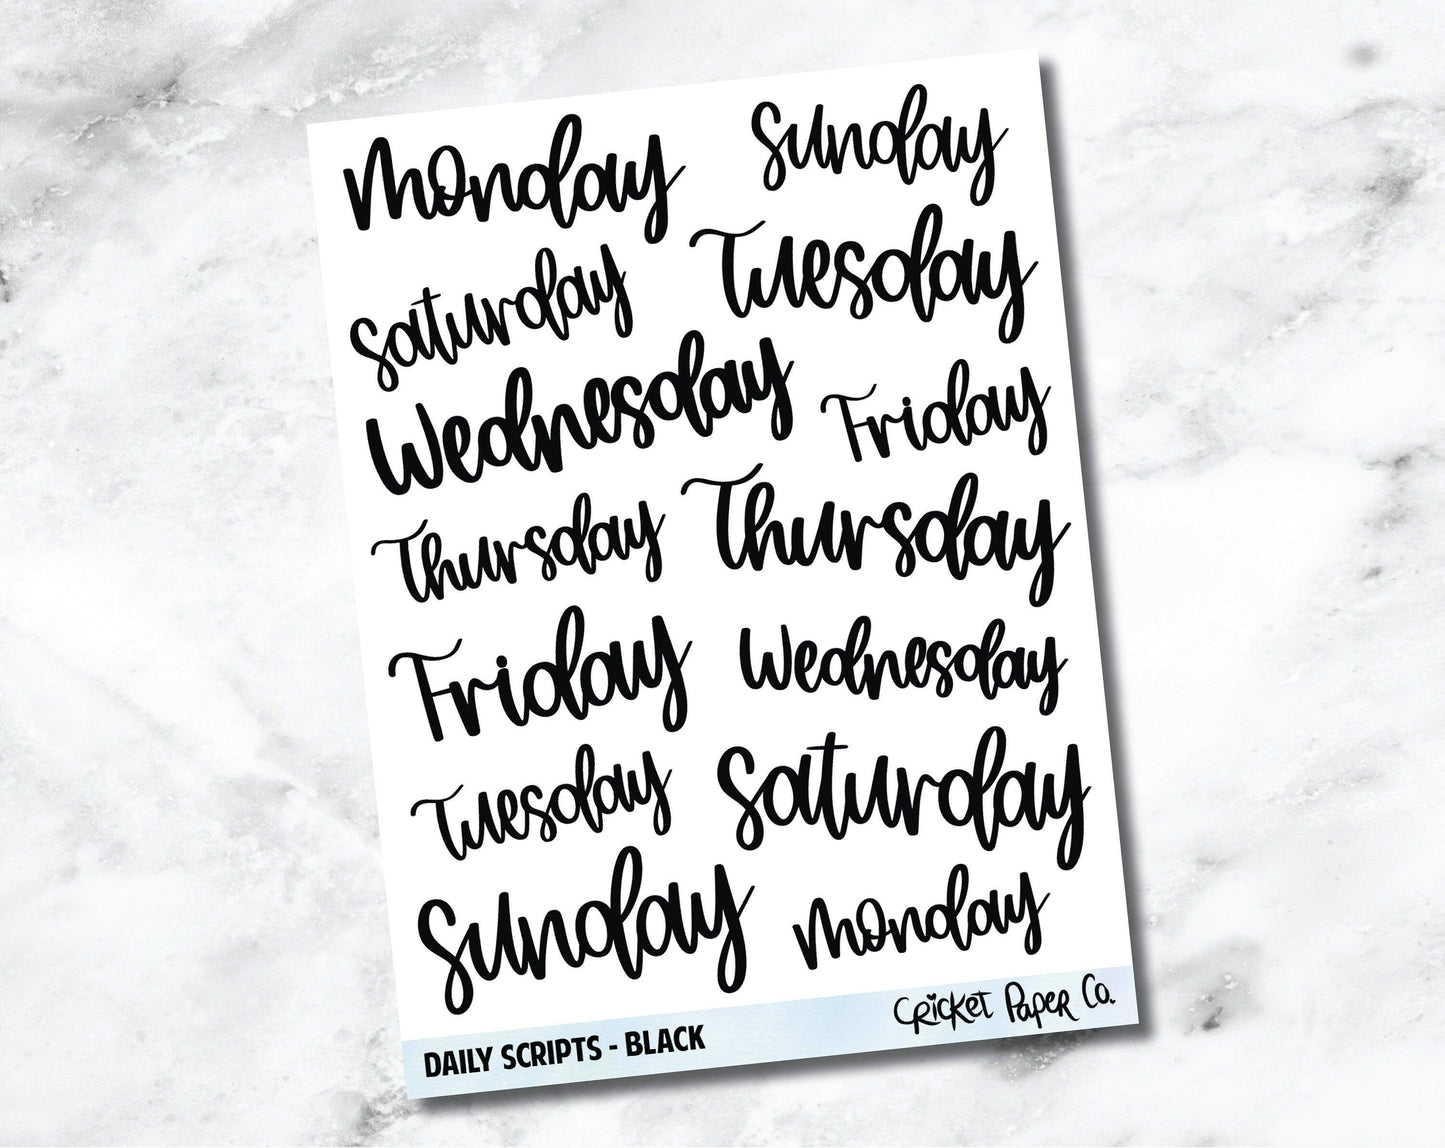 Days of the Week Hand Lettered Script Planner Stickers - Black-Cricket Paper Co.